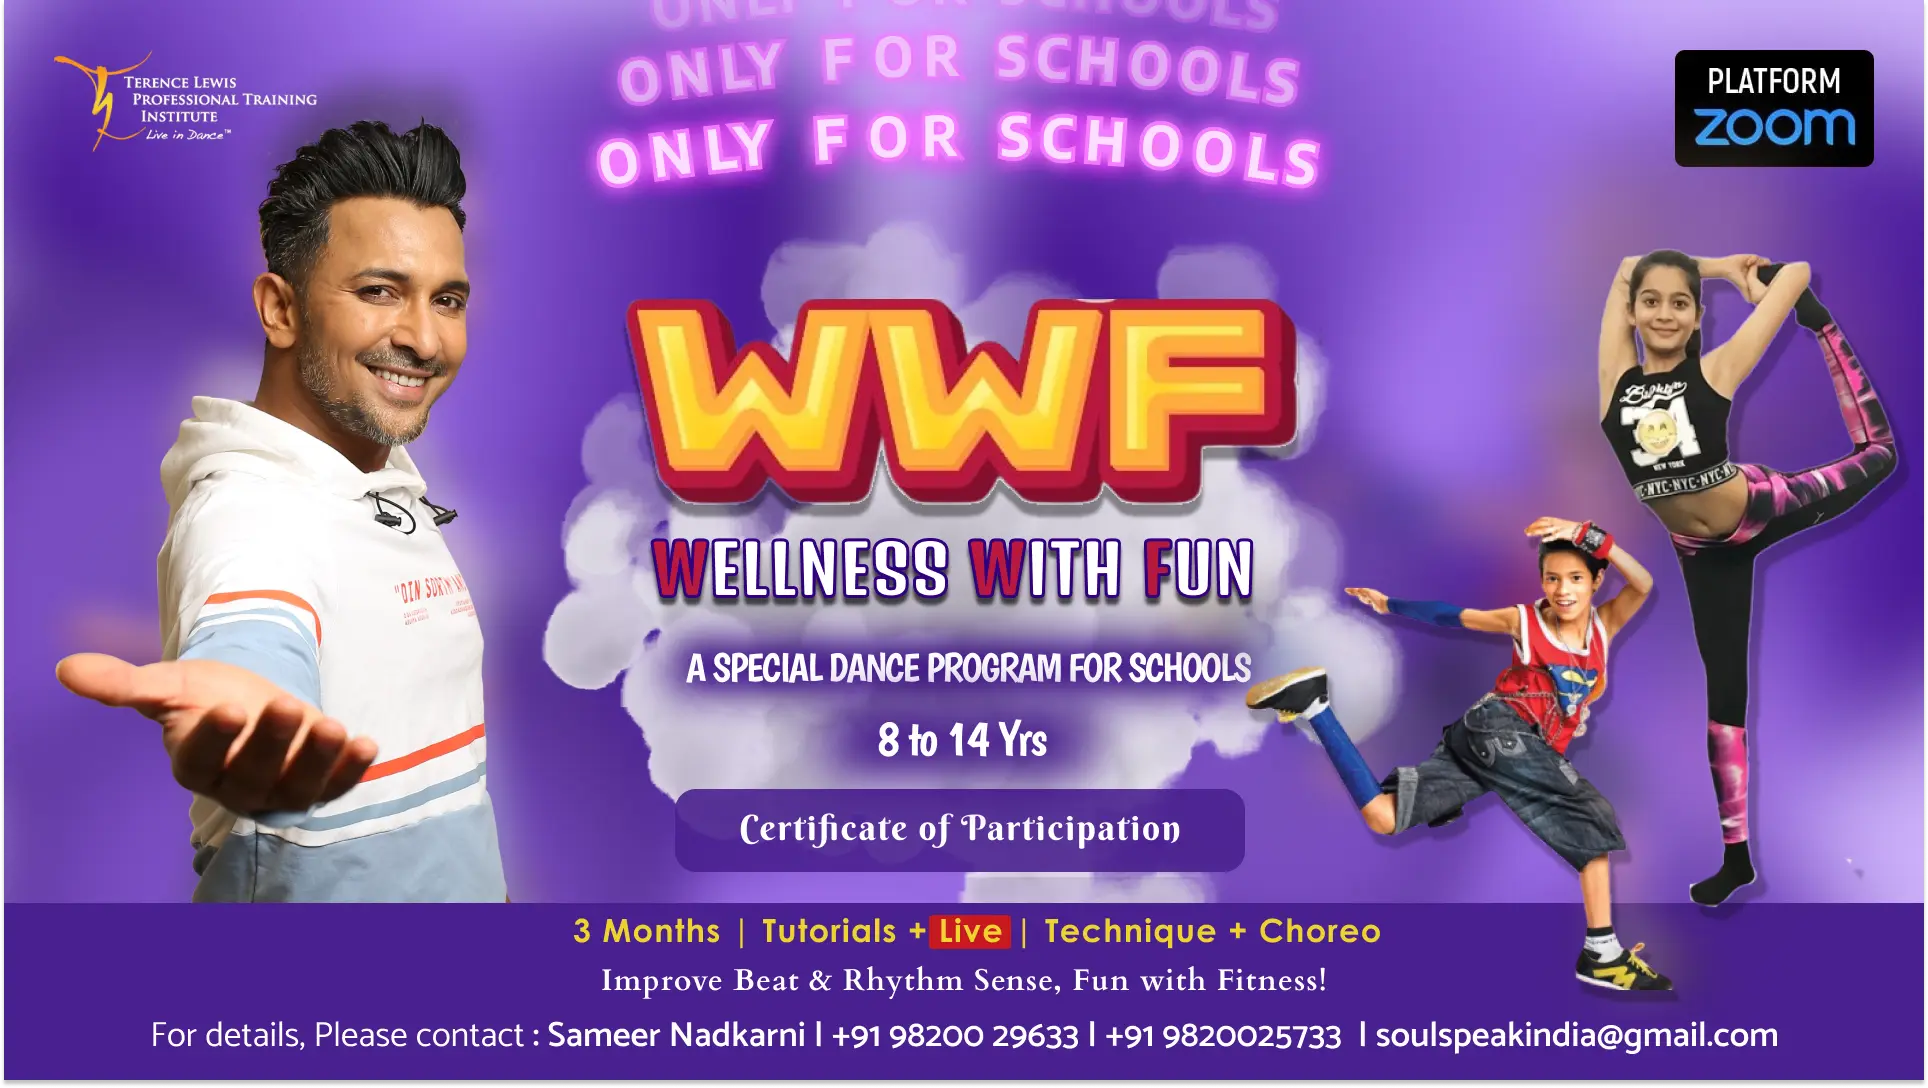 Special Dance Course Only for Schools - WWF (Wellness With Fun)